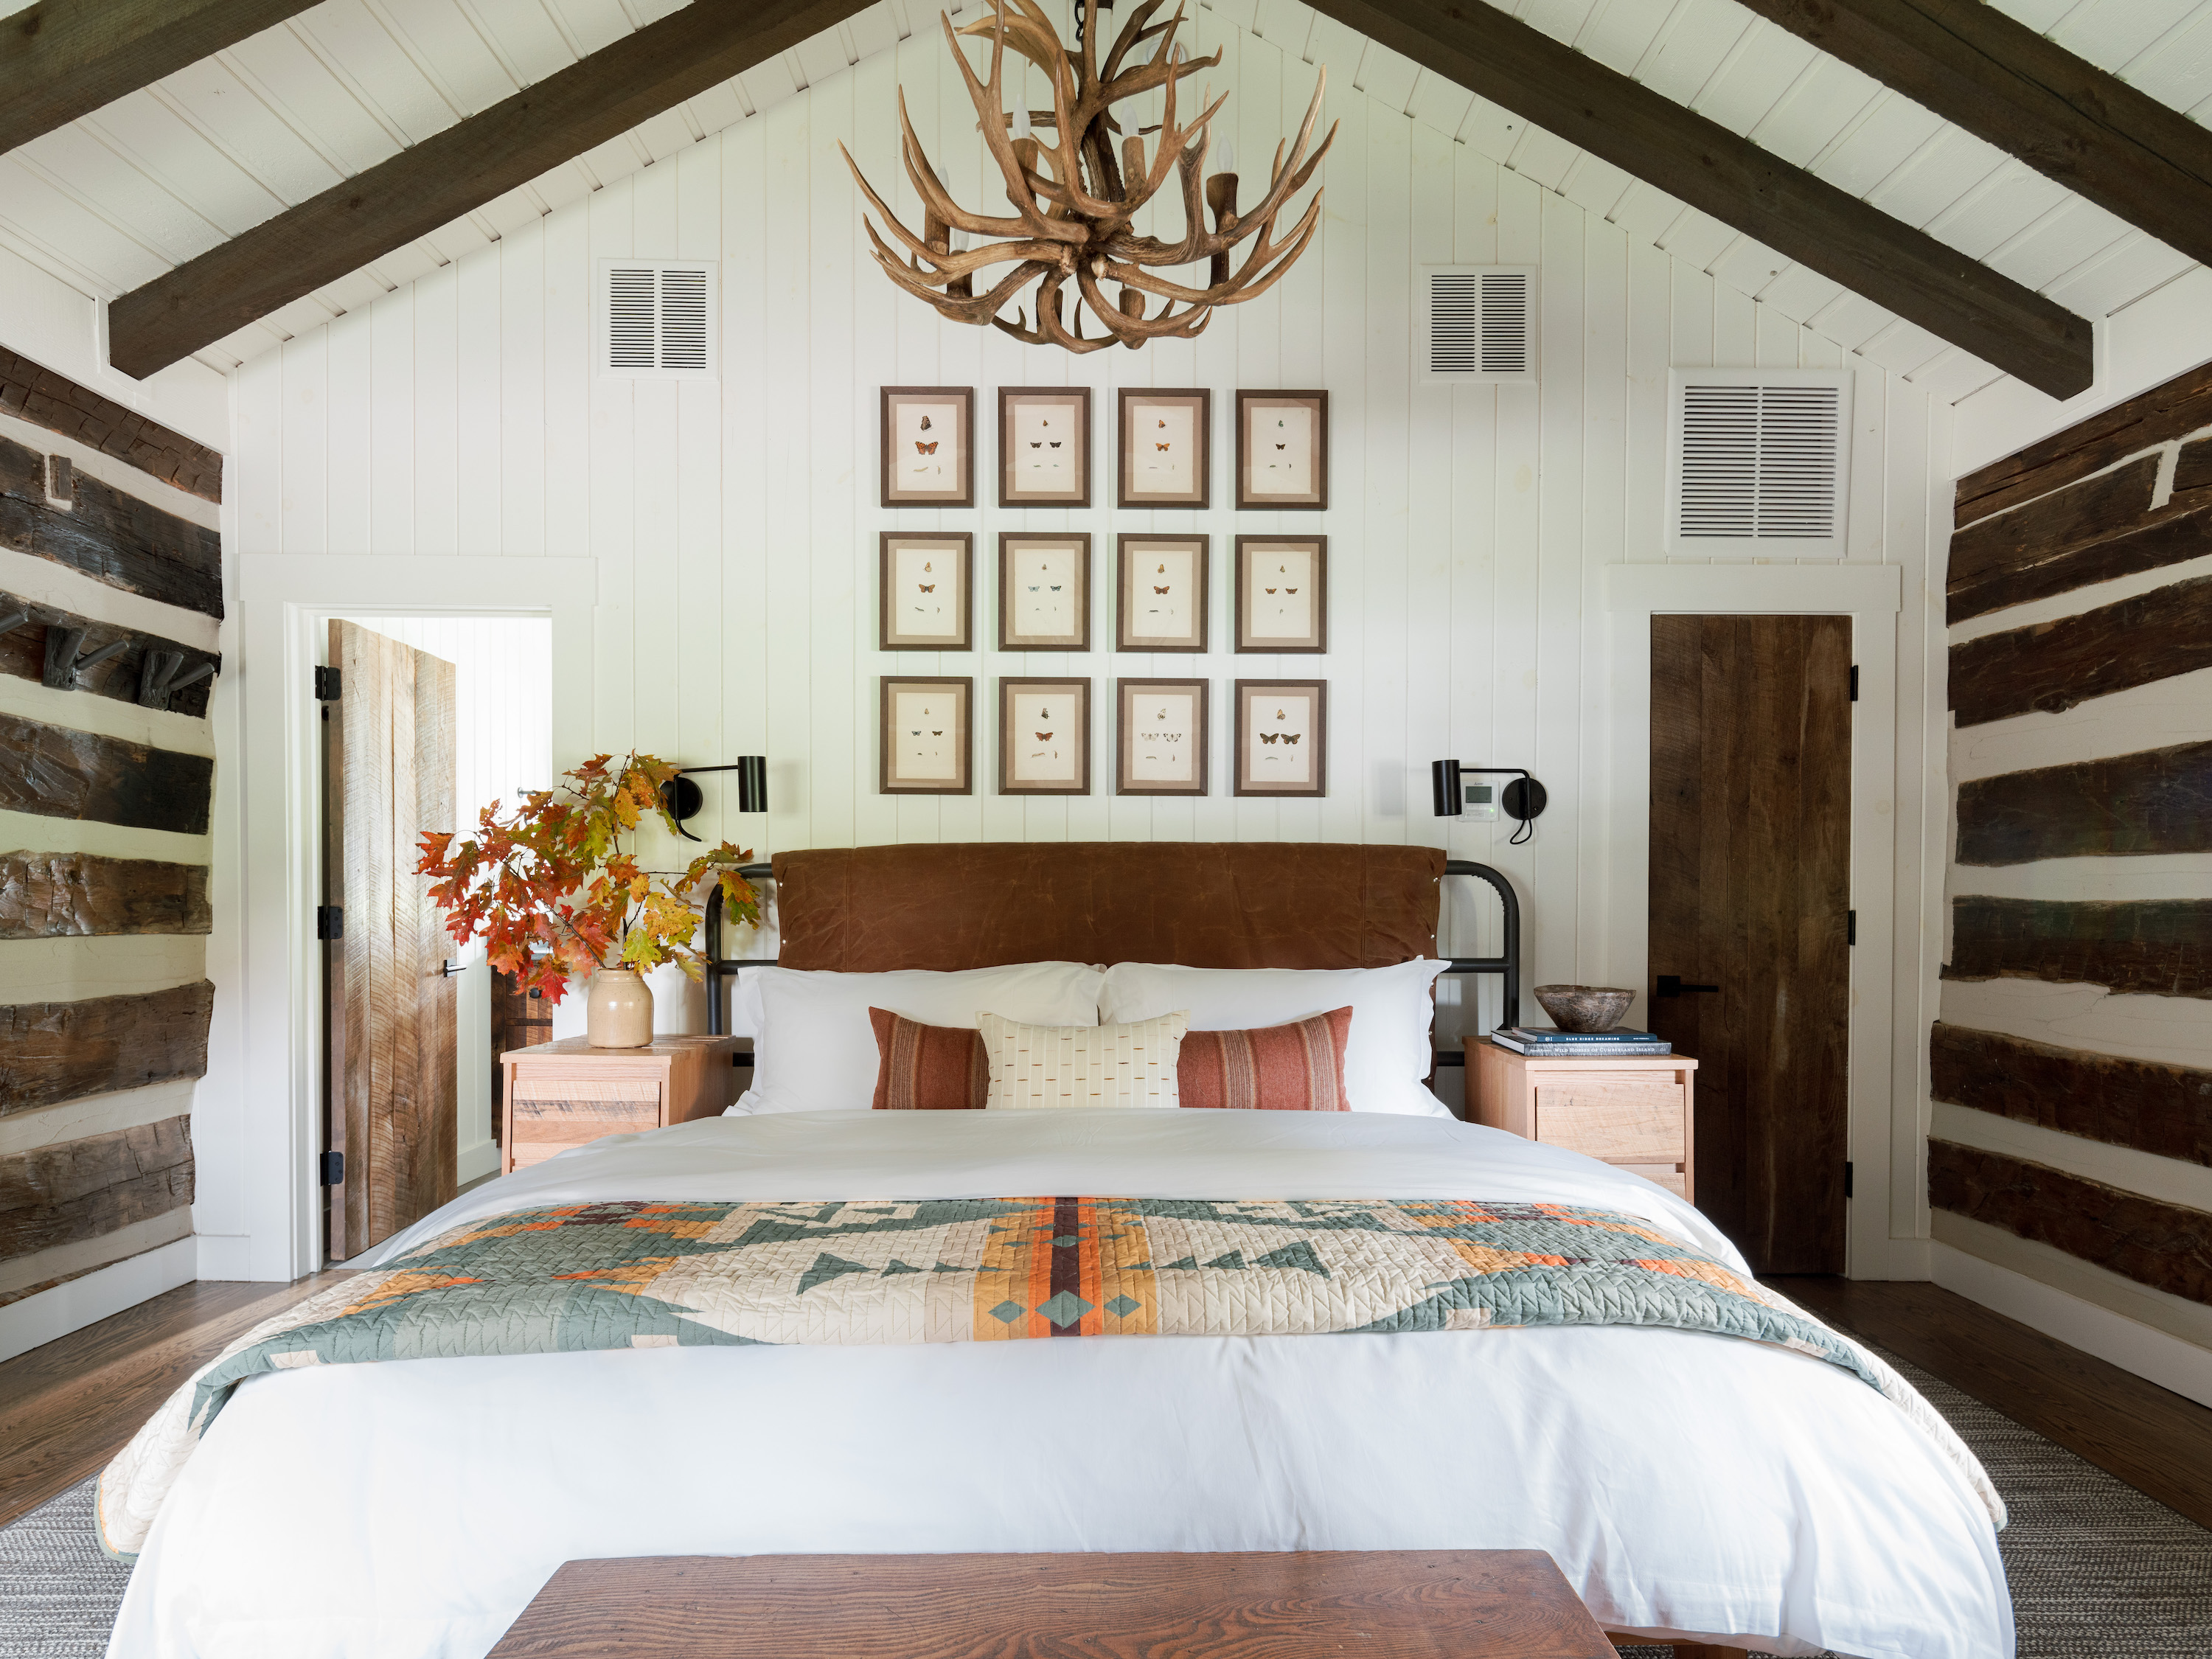 A guest room with wood details and framed butterfly illustrations